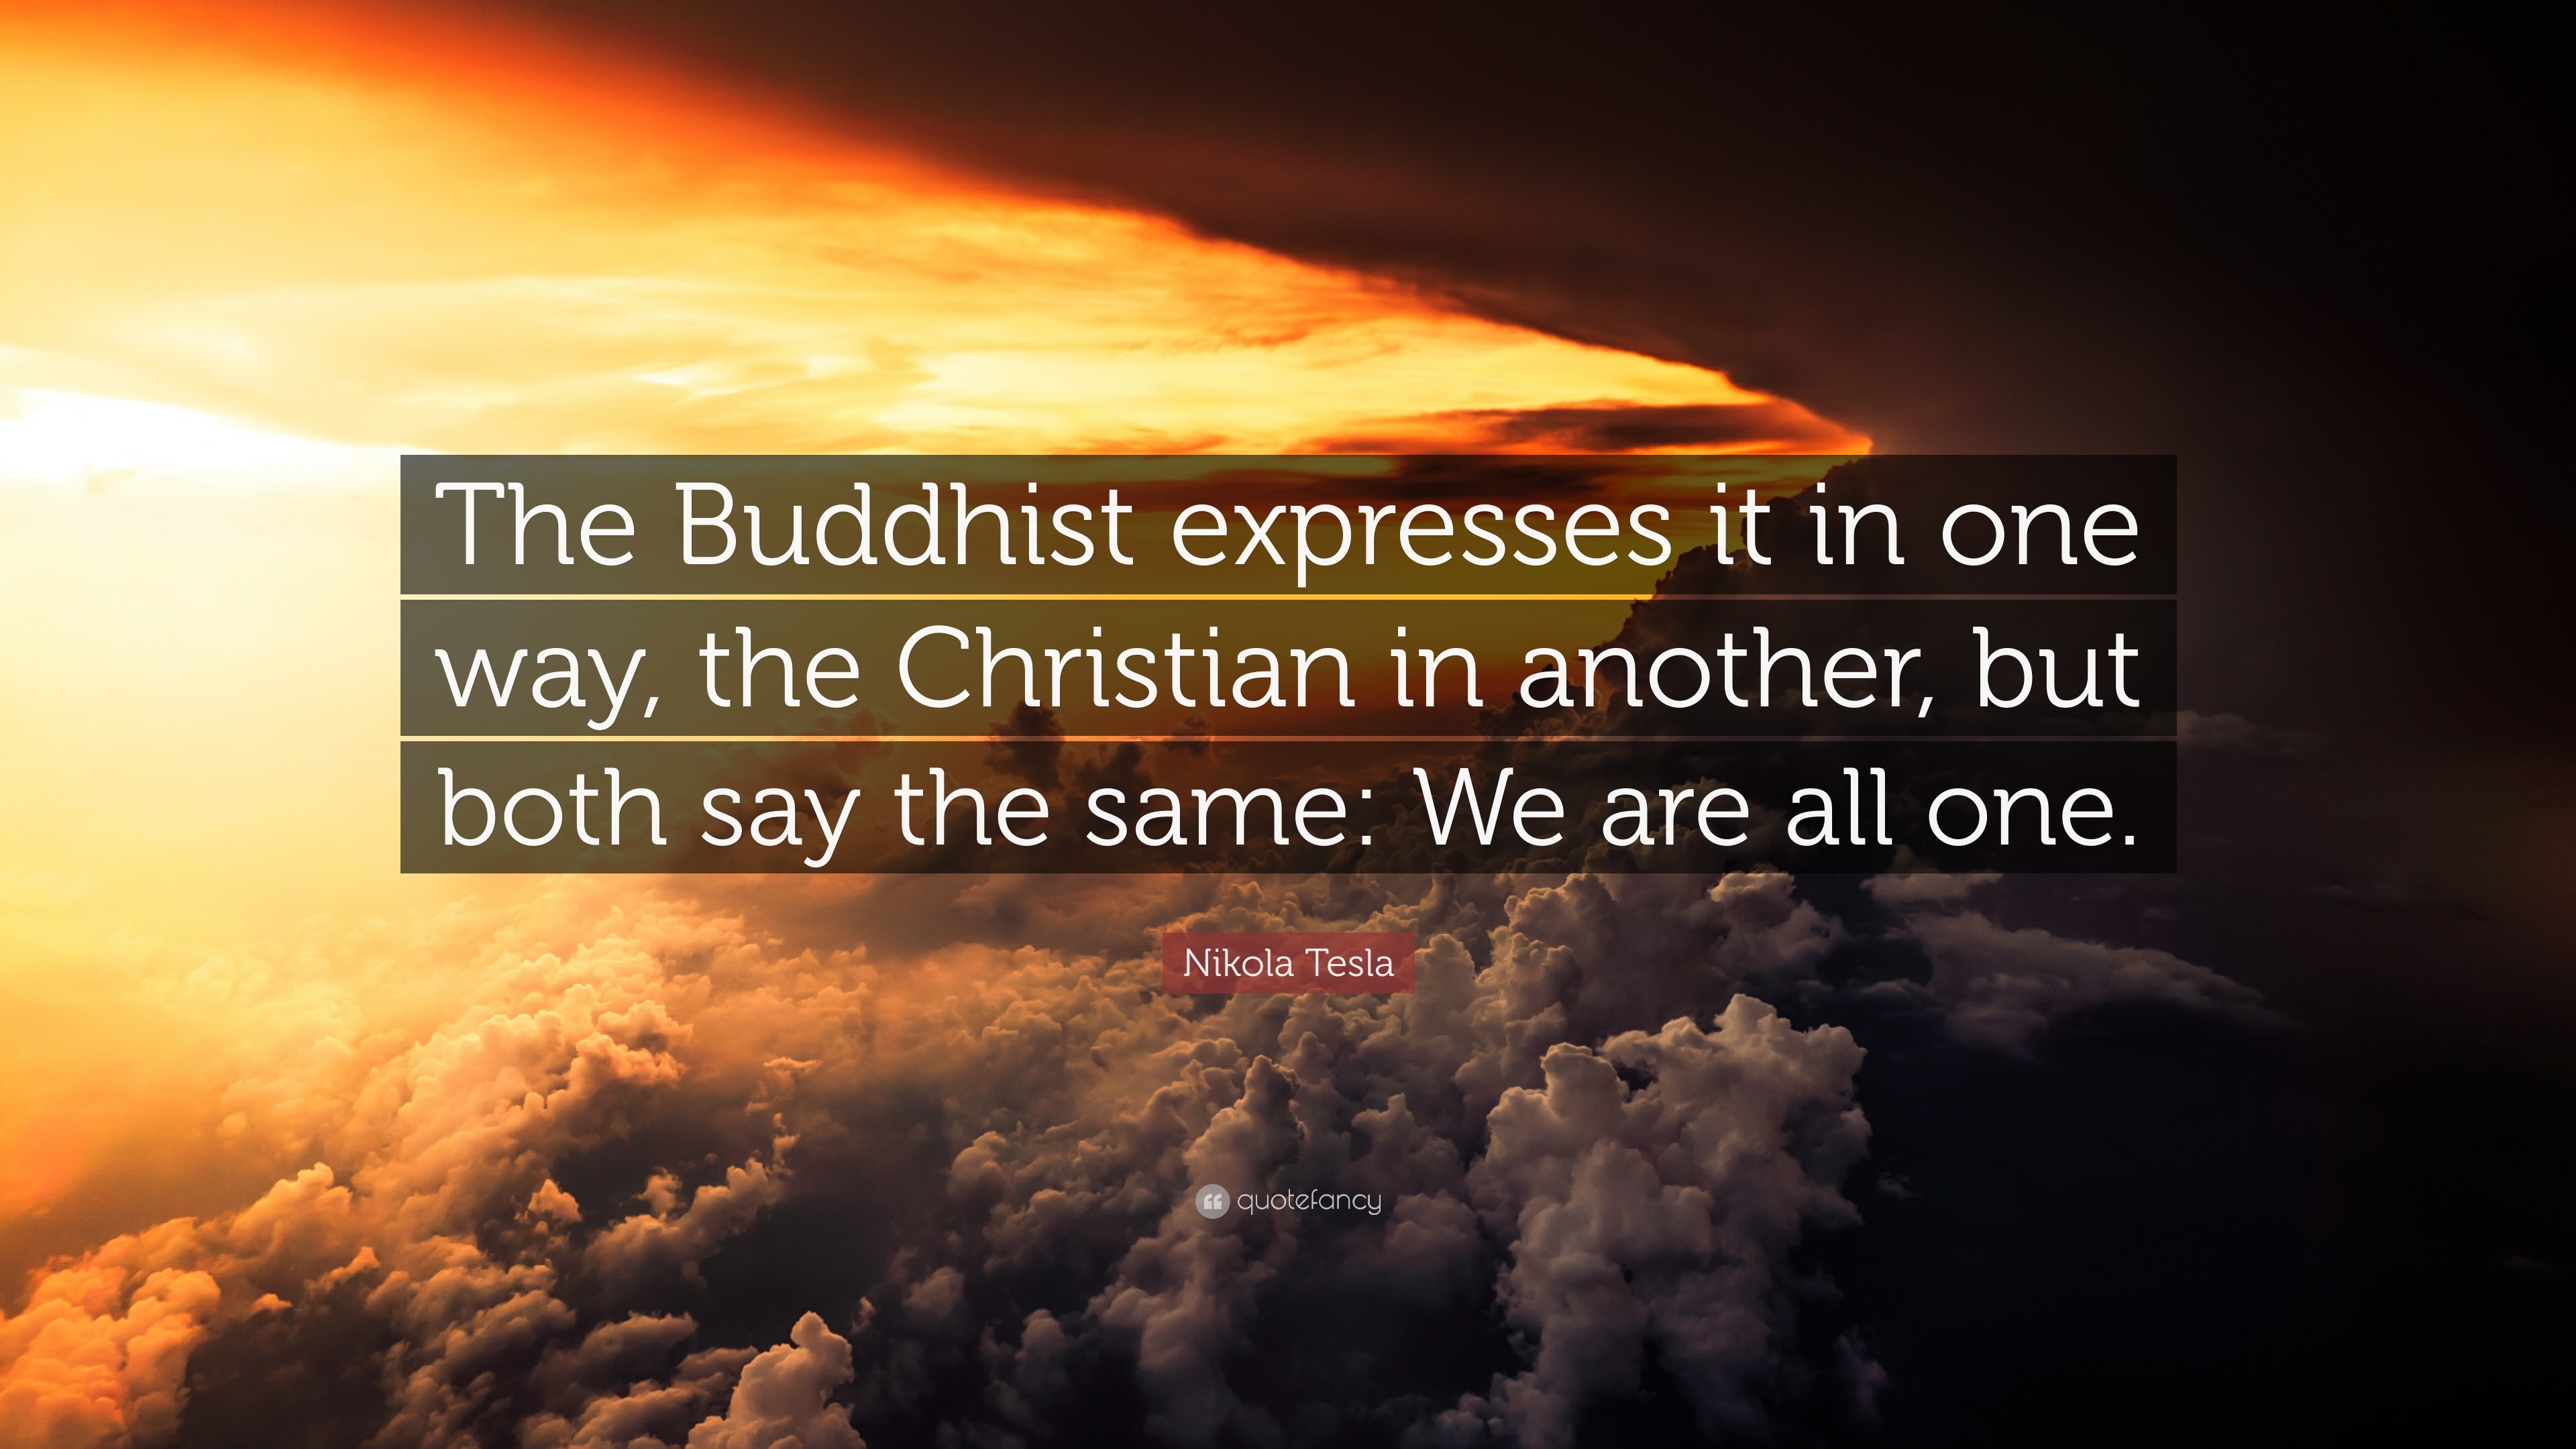 Nikola Tesla The Buddhist expresses it in one way the Christian in another but both say